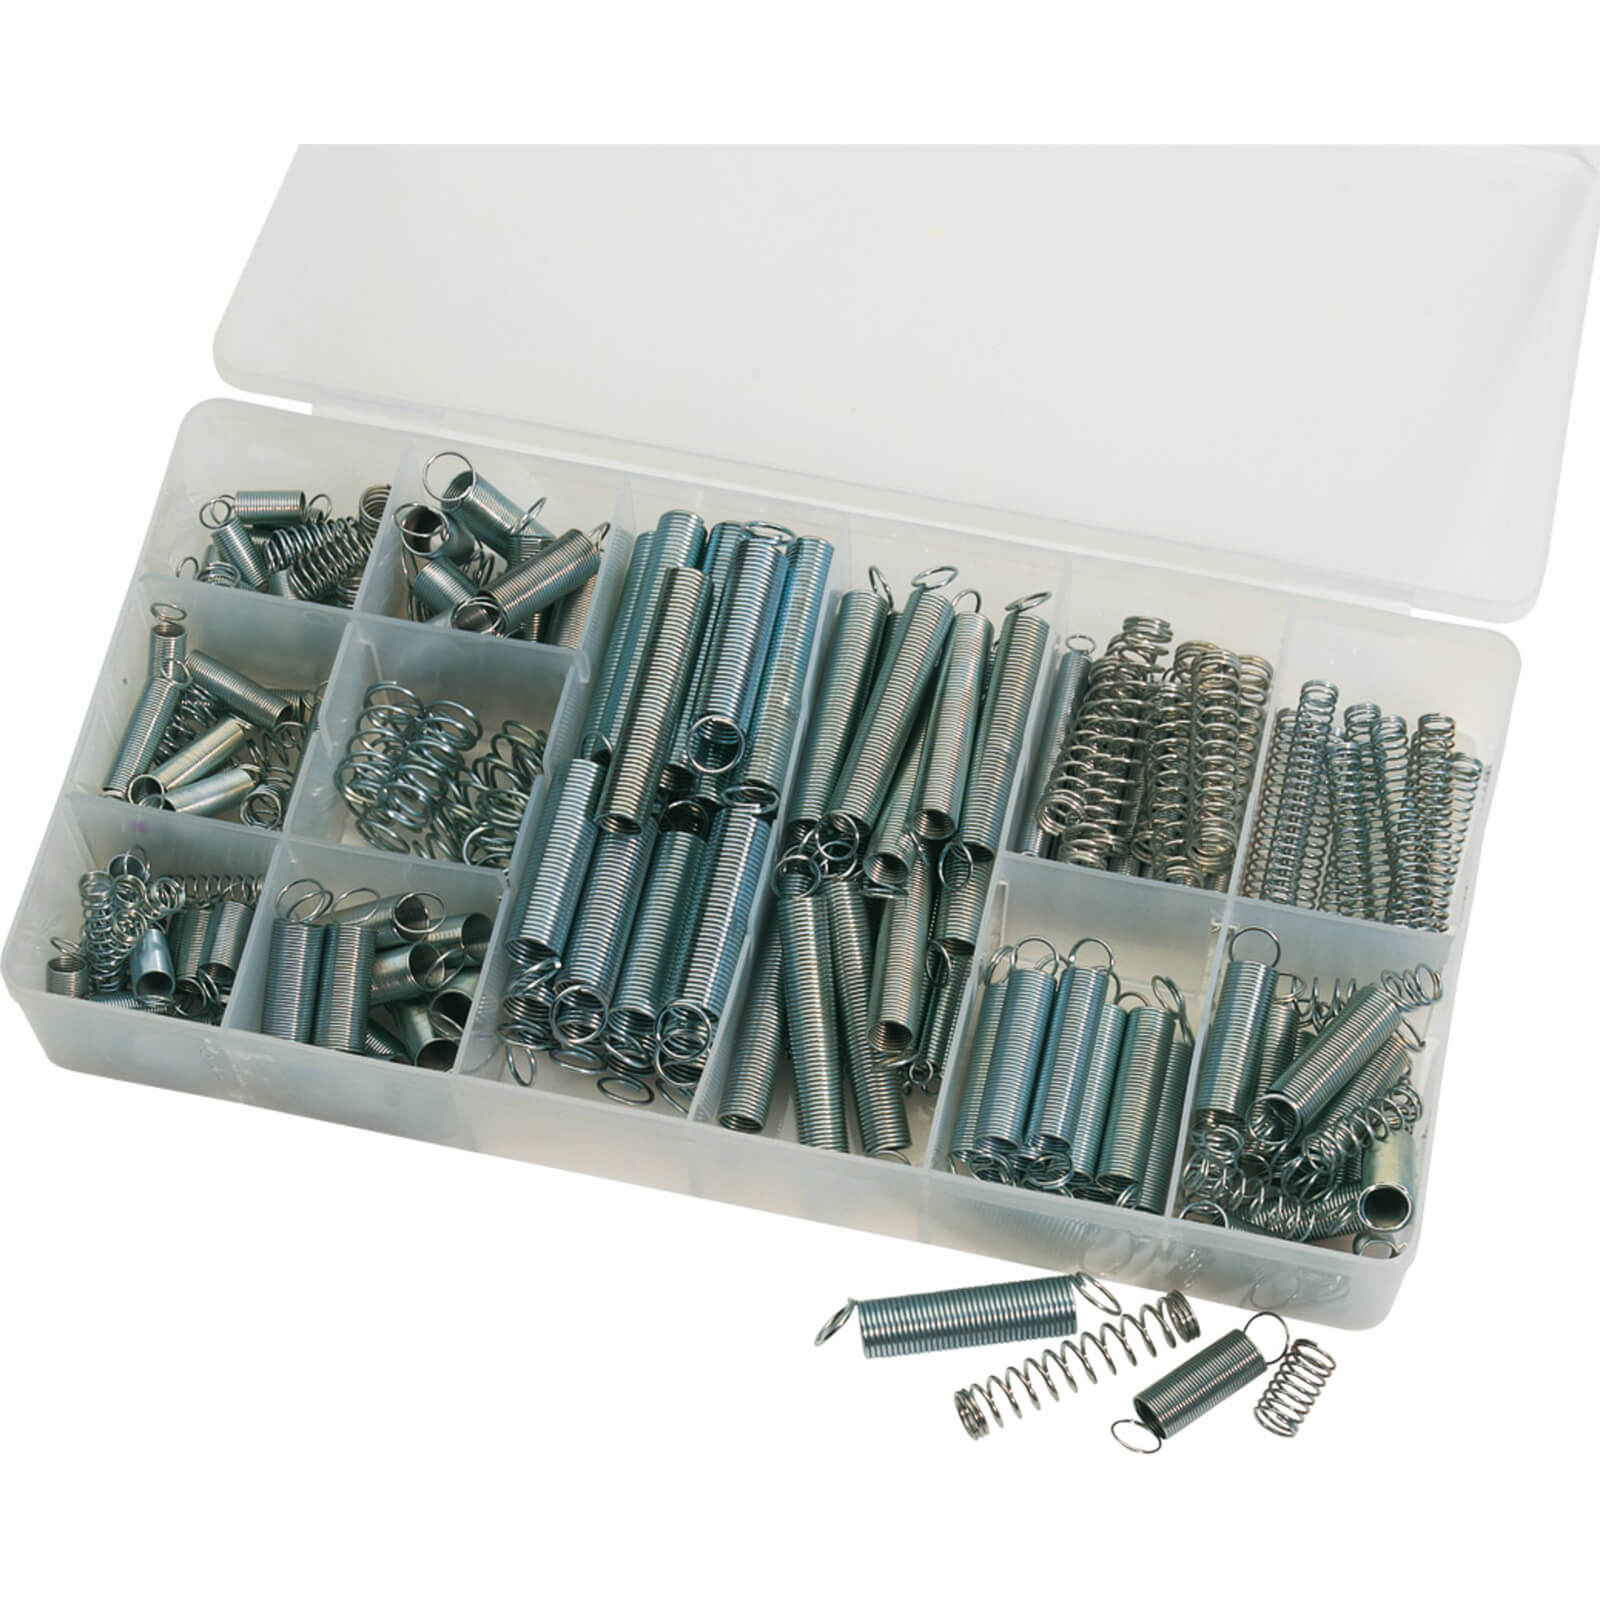 Image of Draper 200 Piece Compression and Extension Spring Assortment